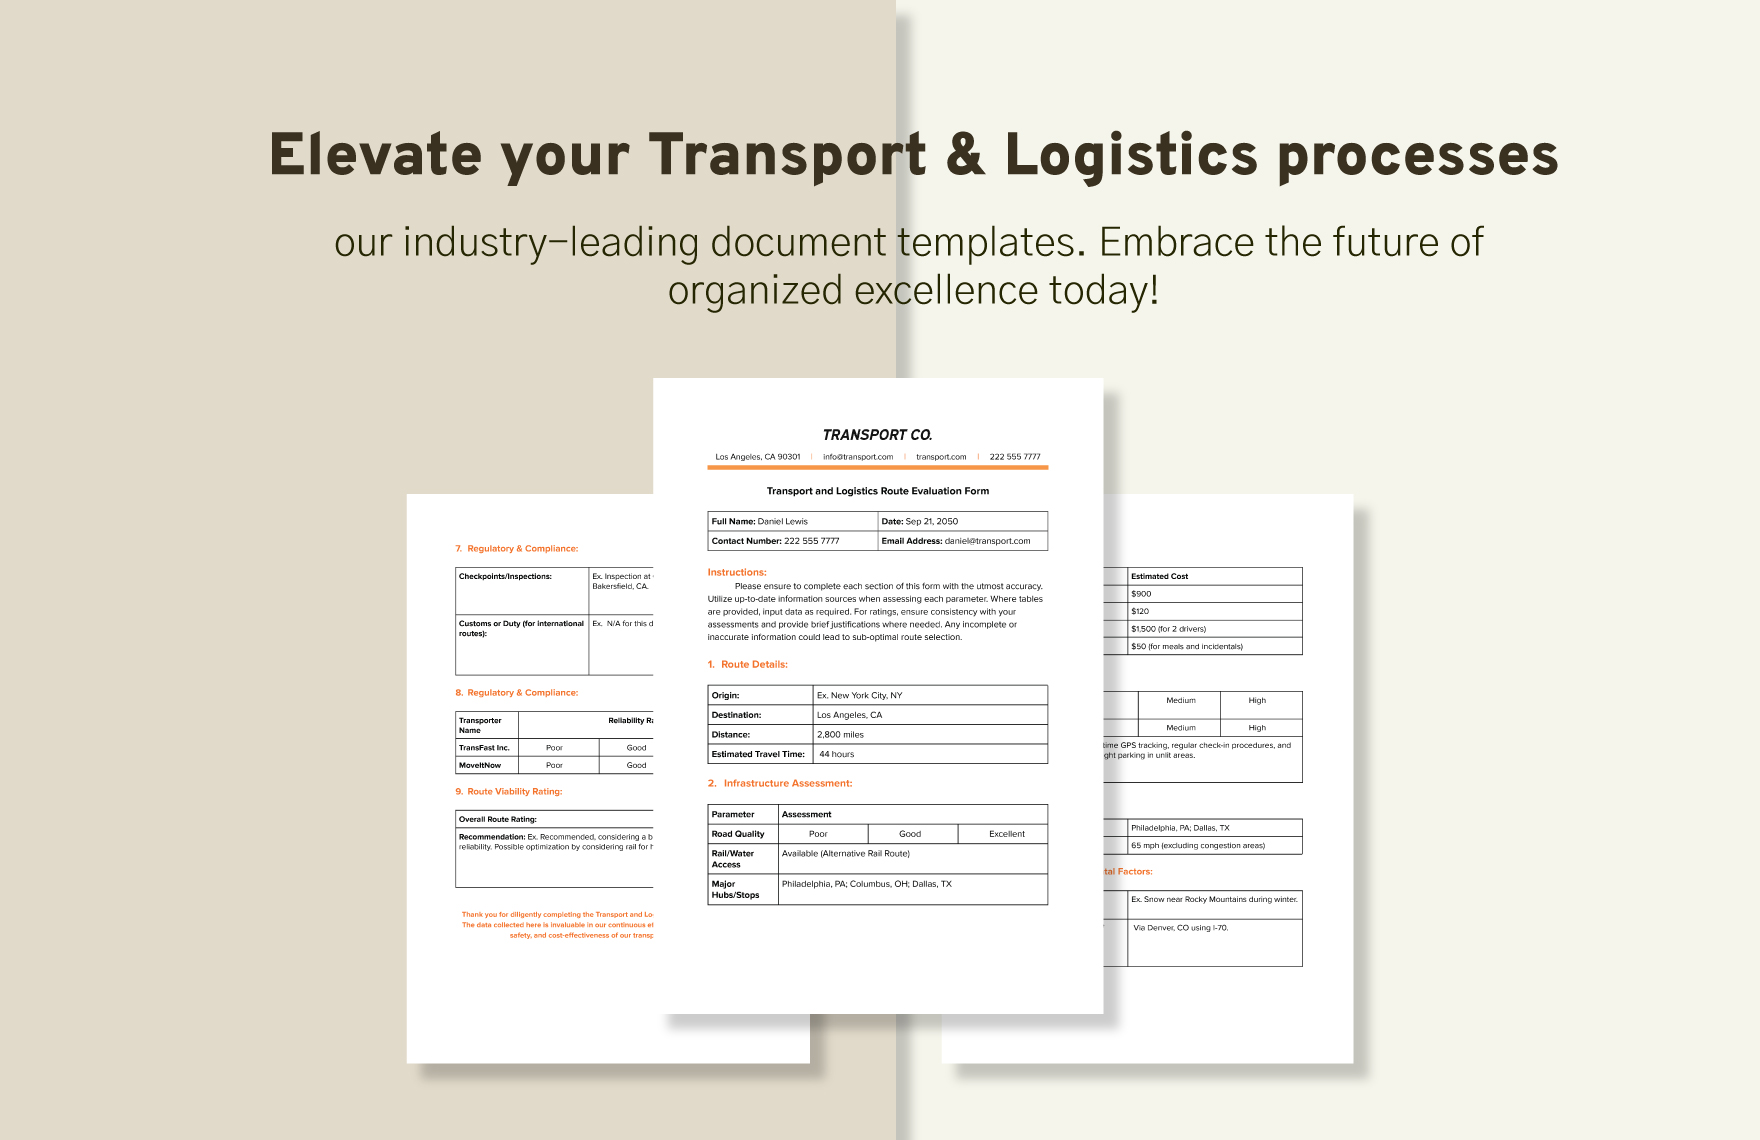 Transport and Logistics  Route Evaluation Form  Template